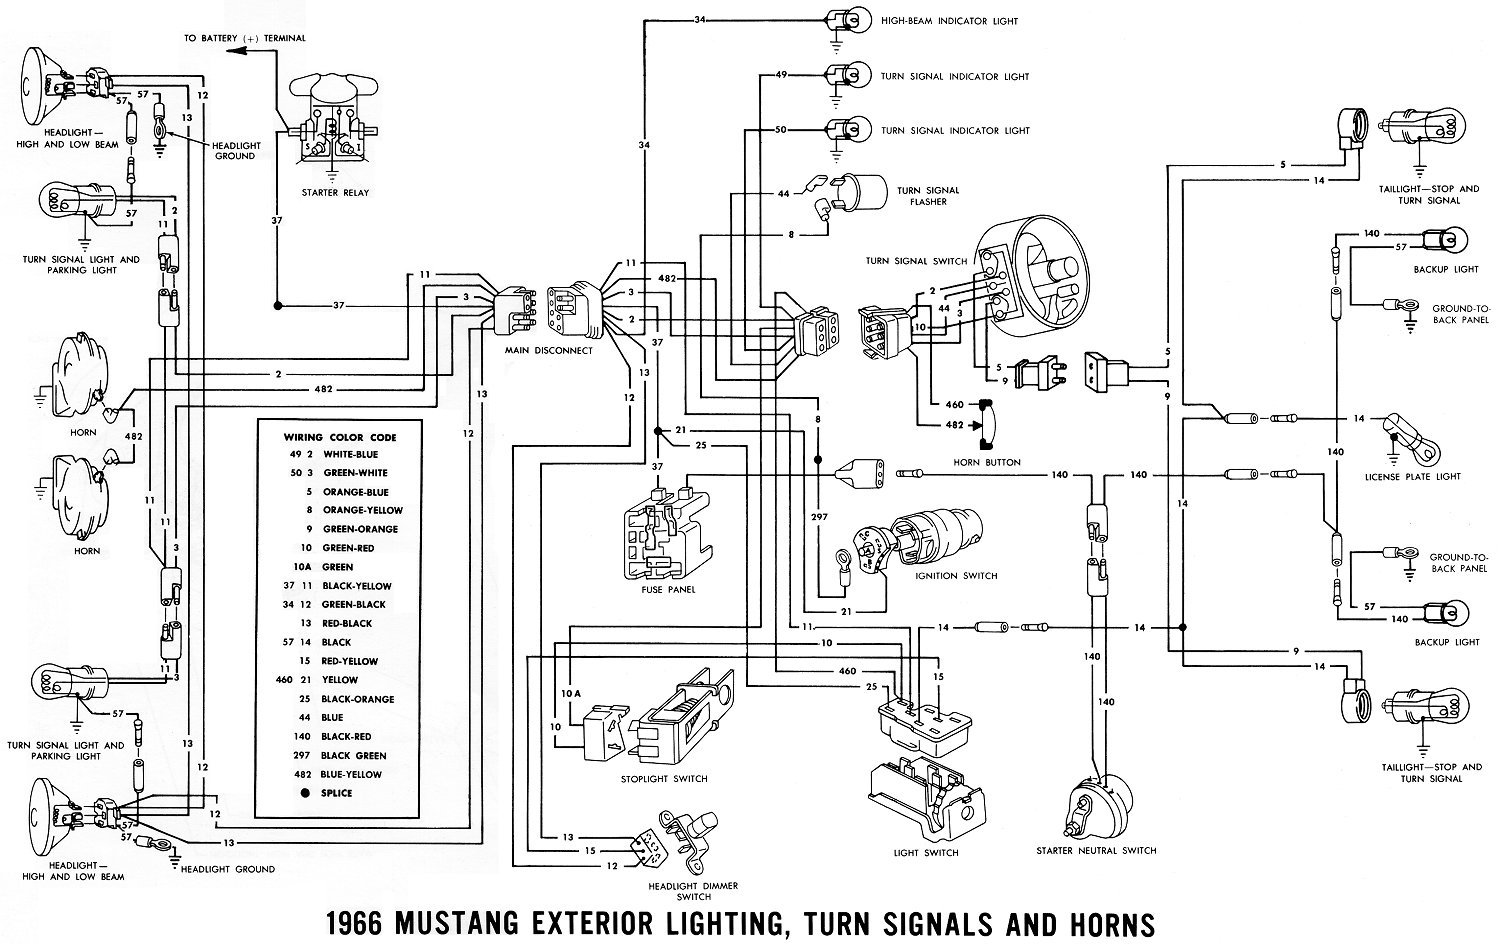 Mustang Technical Discussion > Pre 1973 > Back Up Light Issues - Weird